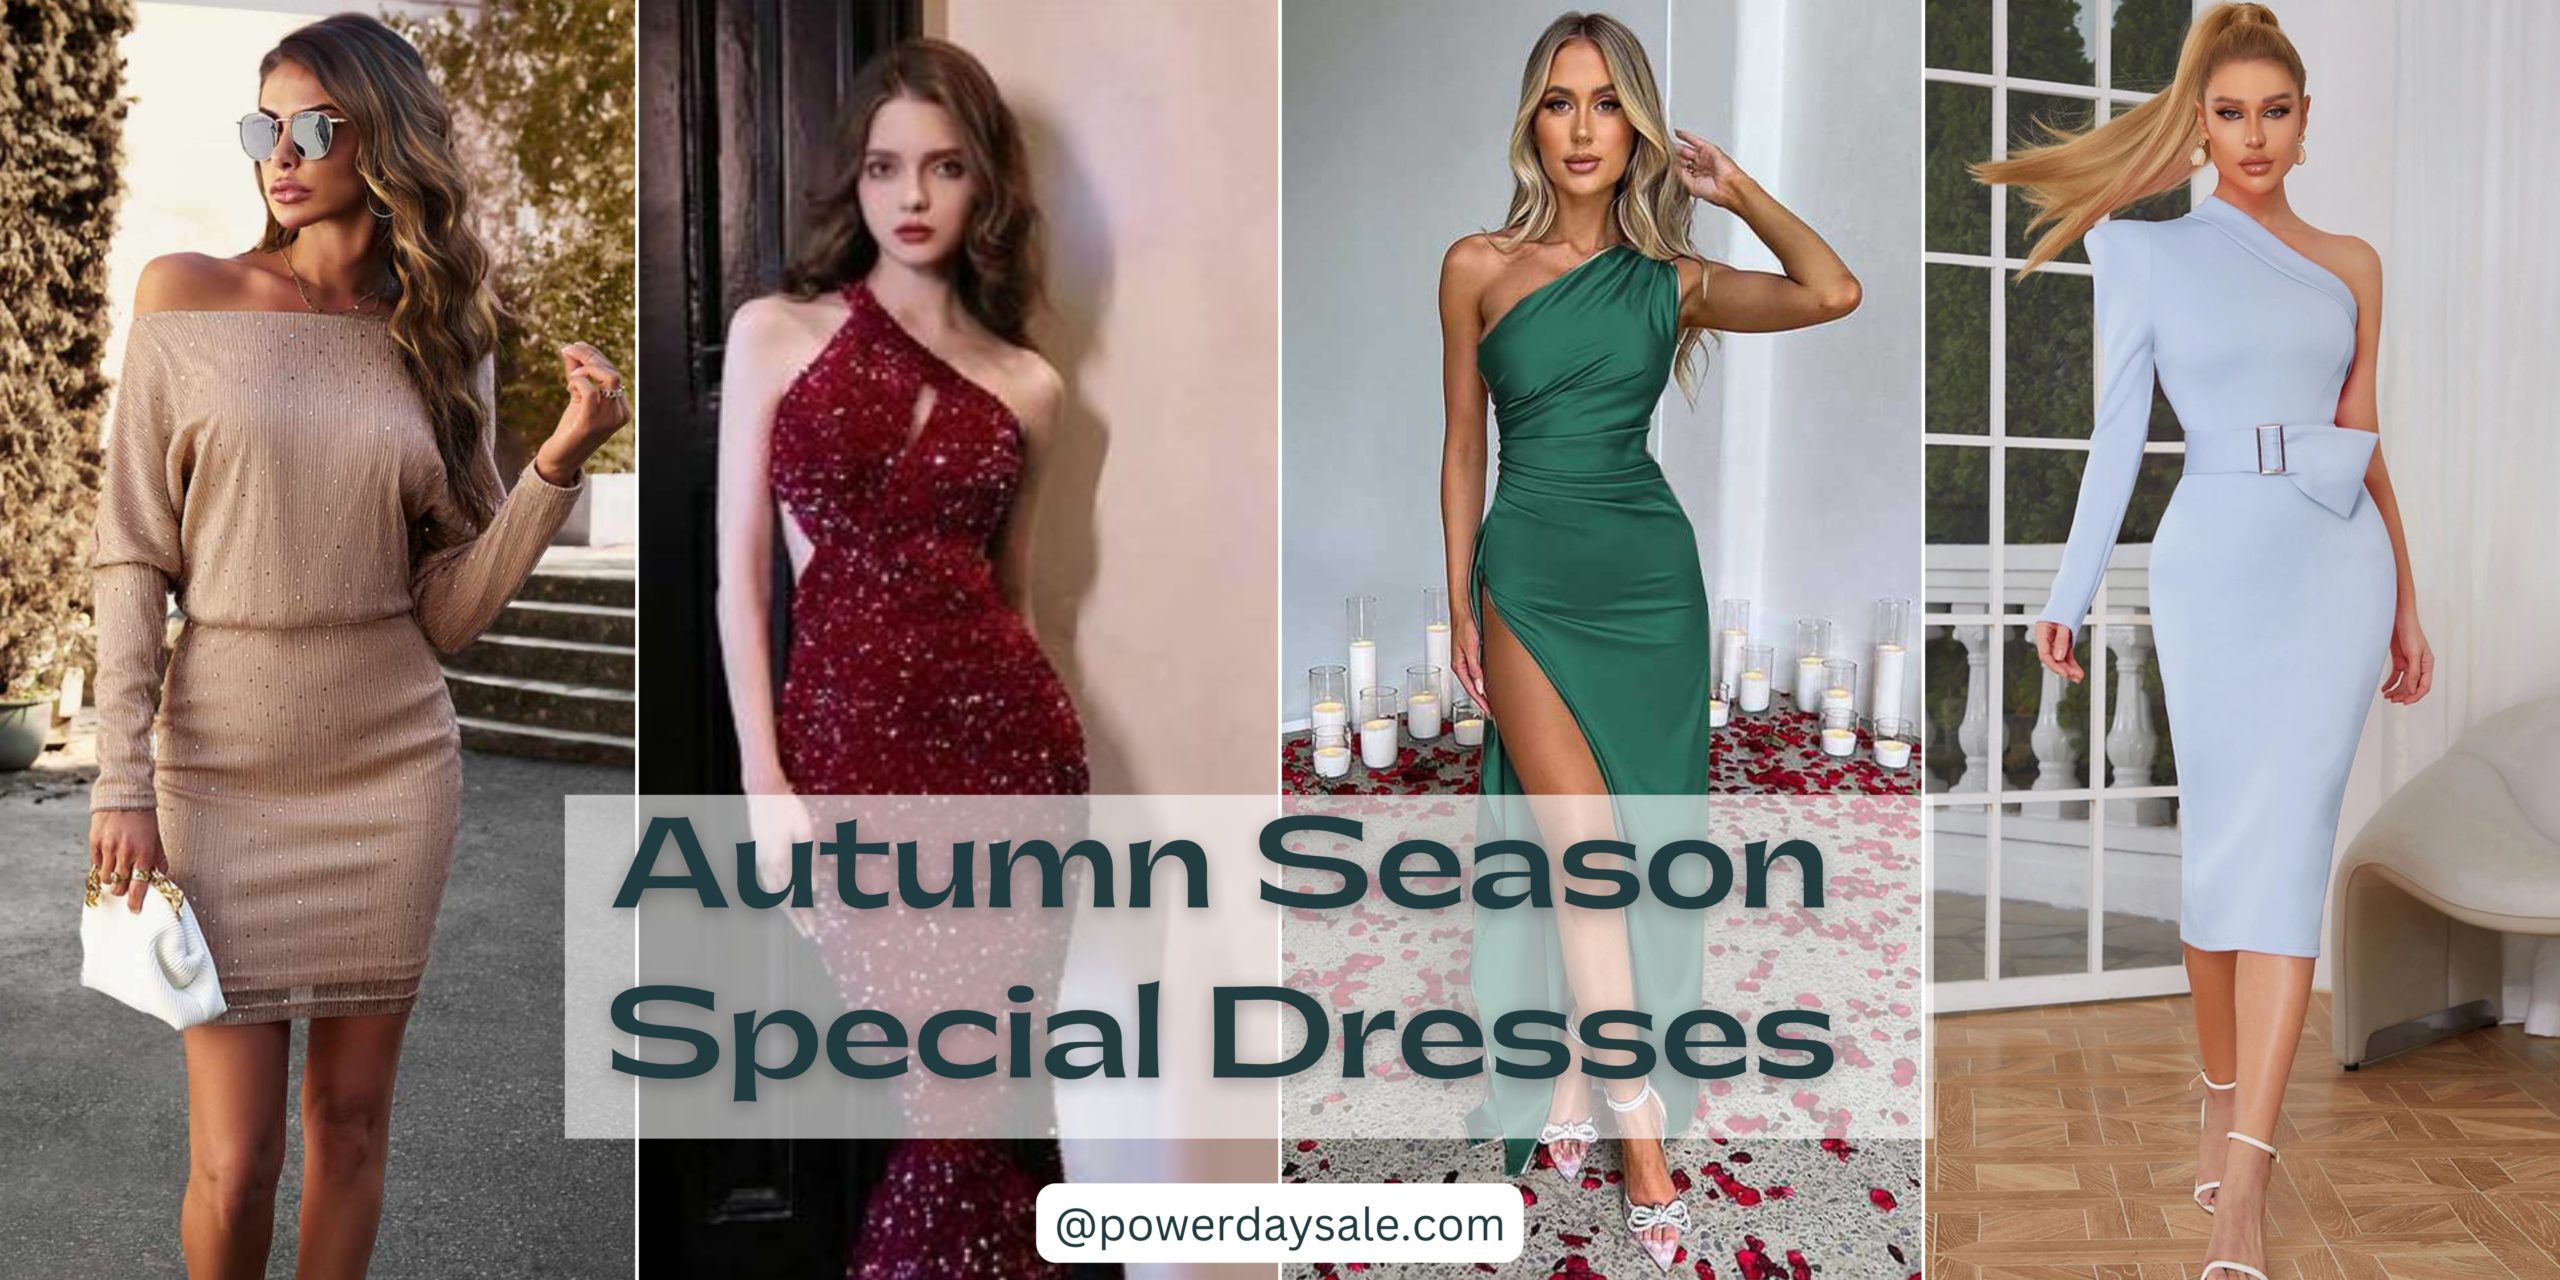 You are currently viewing Autumn Season Special Dresses